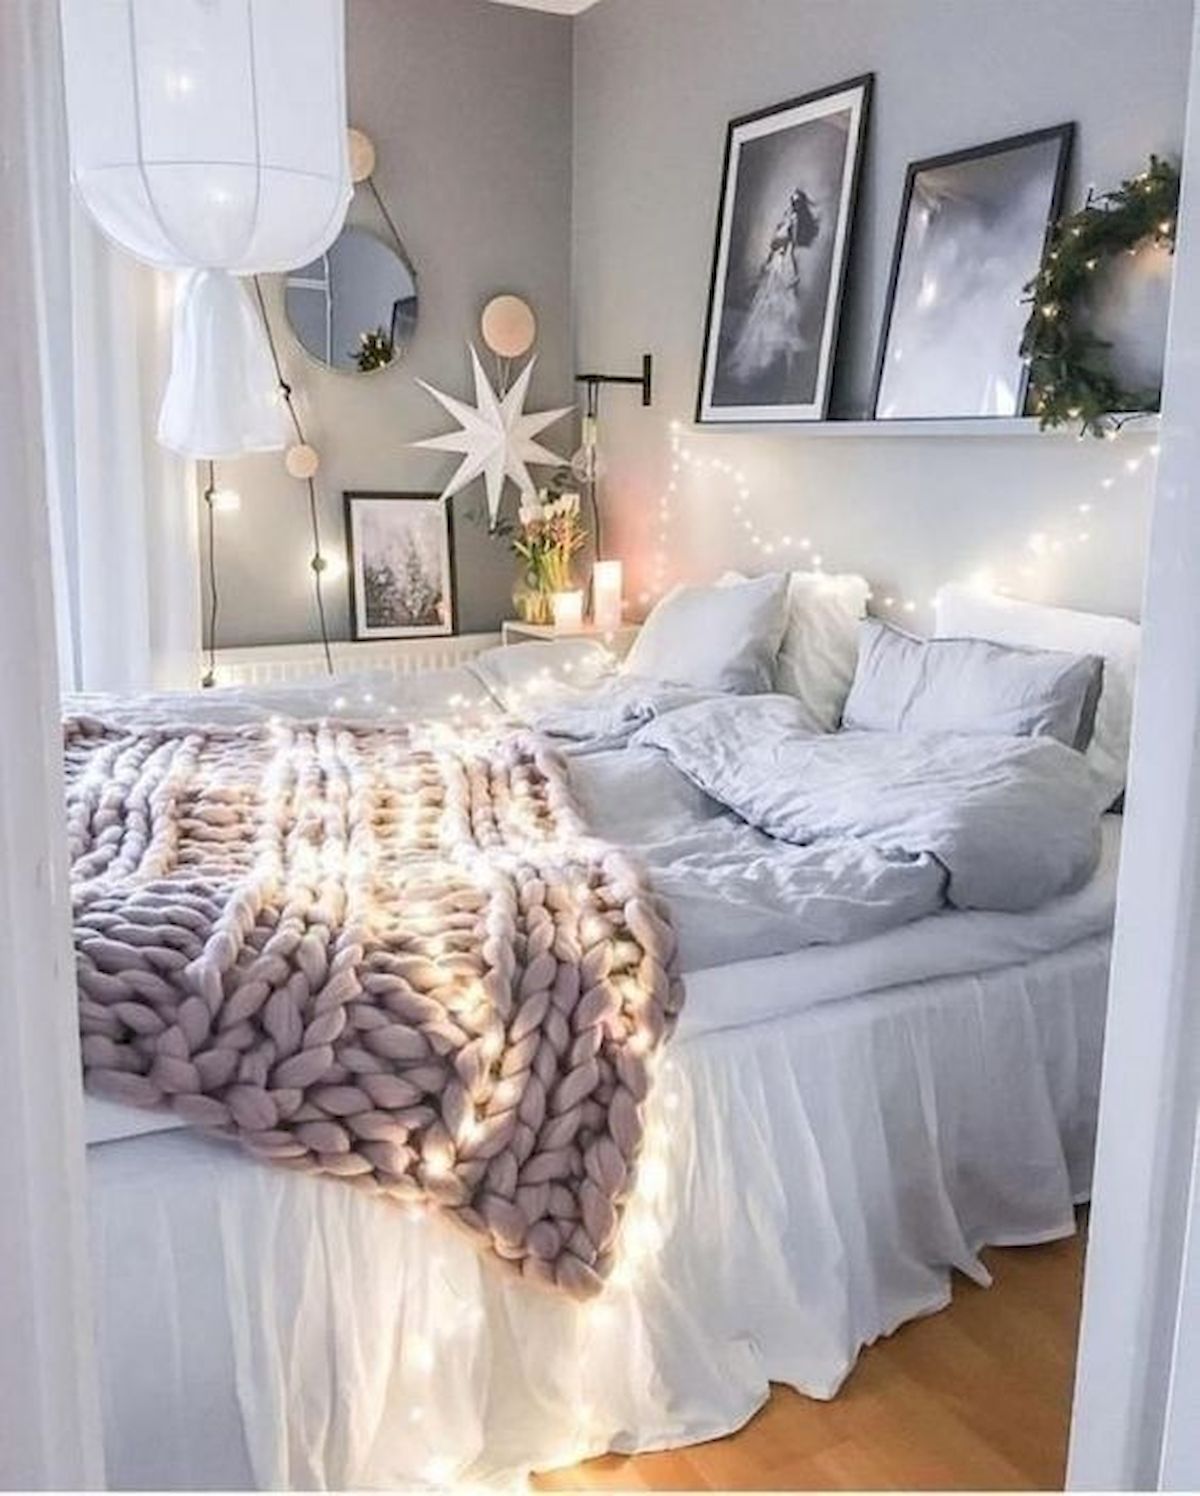 40 Cute Small Bedroom Design and Decor Ideas for Teenage Girl (25)